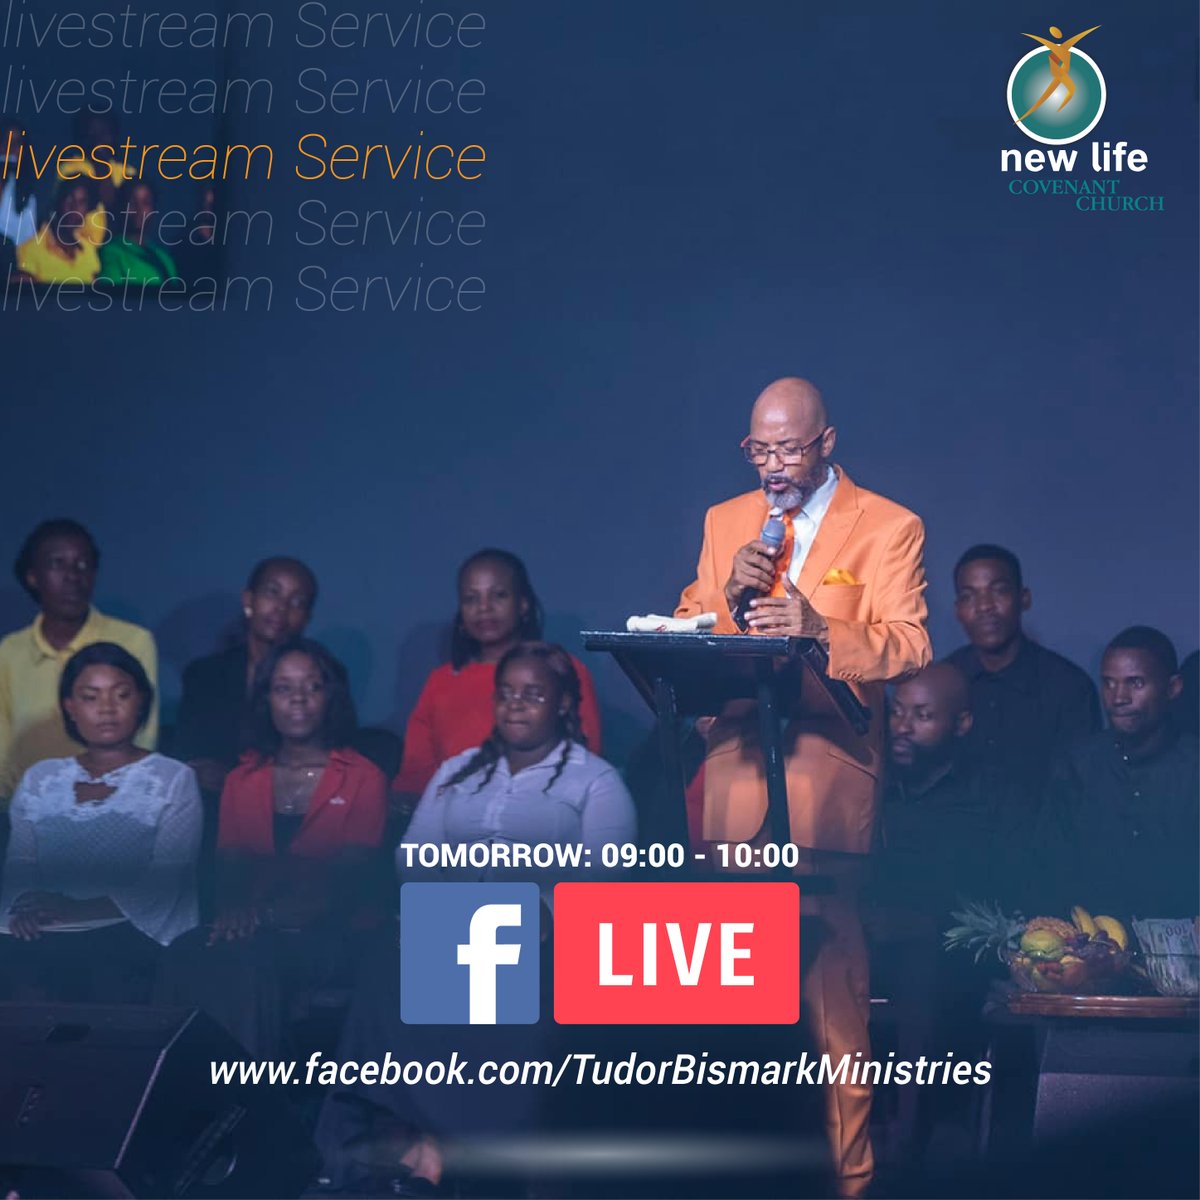 Join us tomorrow for our livestream service on Facebook and experience God's word from 09:00 to 10:00 (CAT). Don't miss it, spread the word! #NLCC #Jabula #LivestreamService #KingdomCathedral